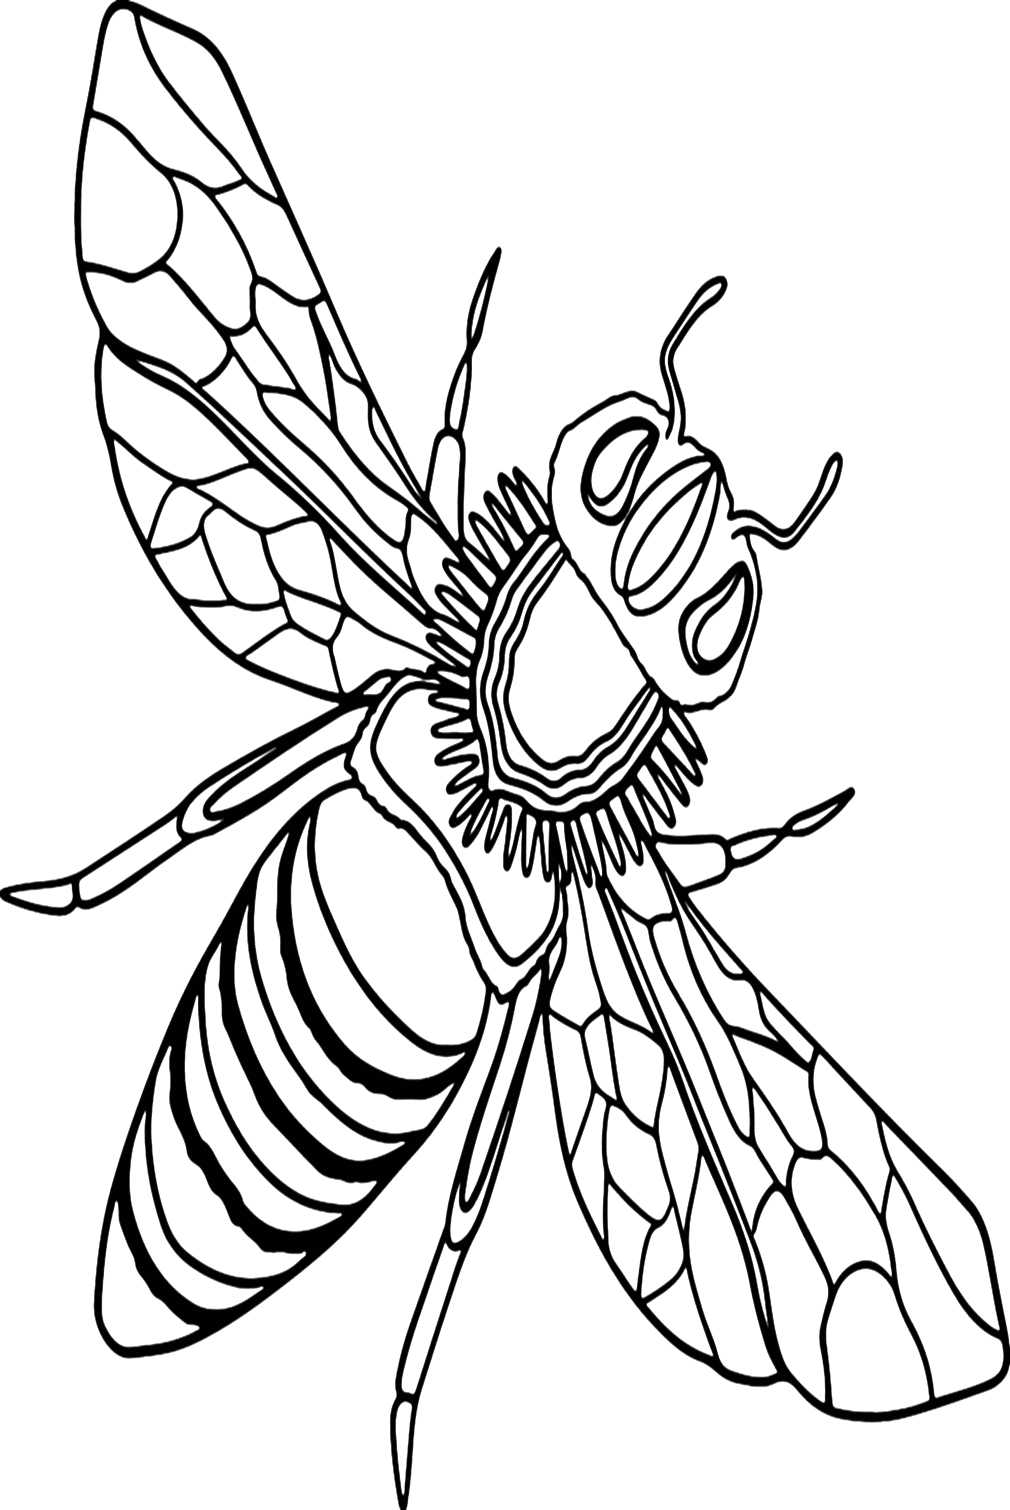 Wasp Picture To Color from Wasp